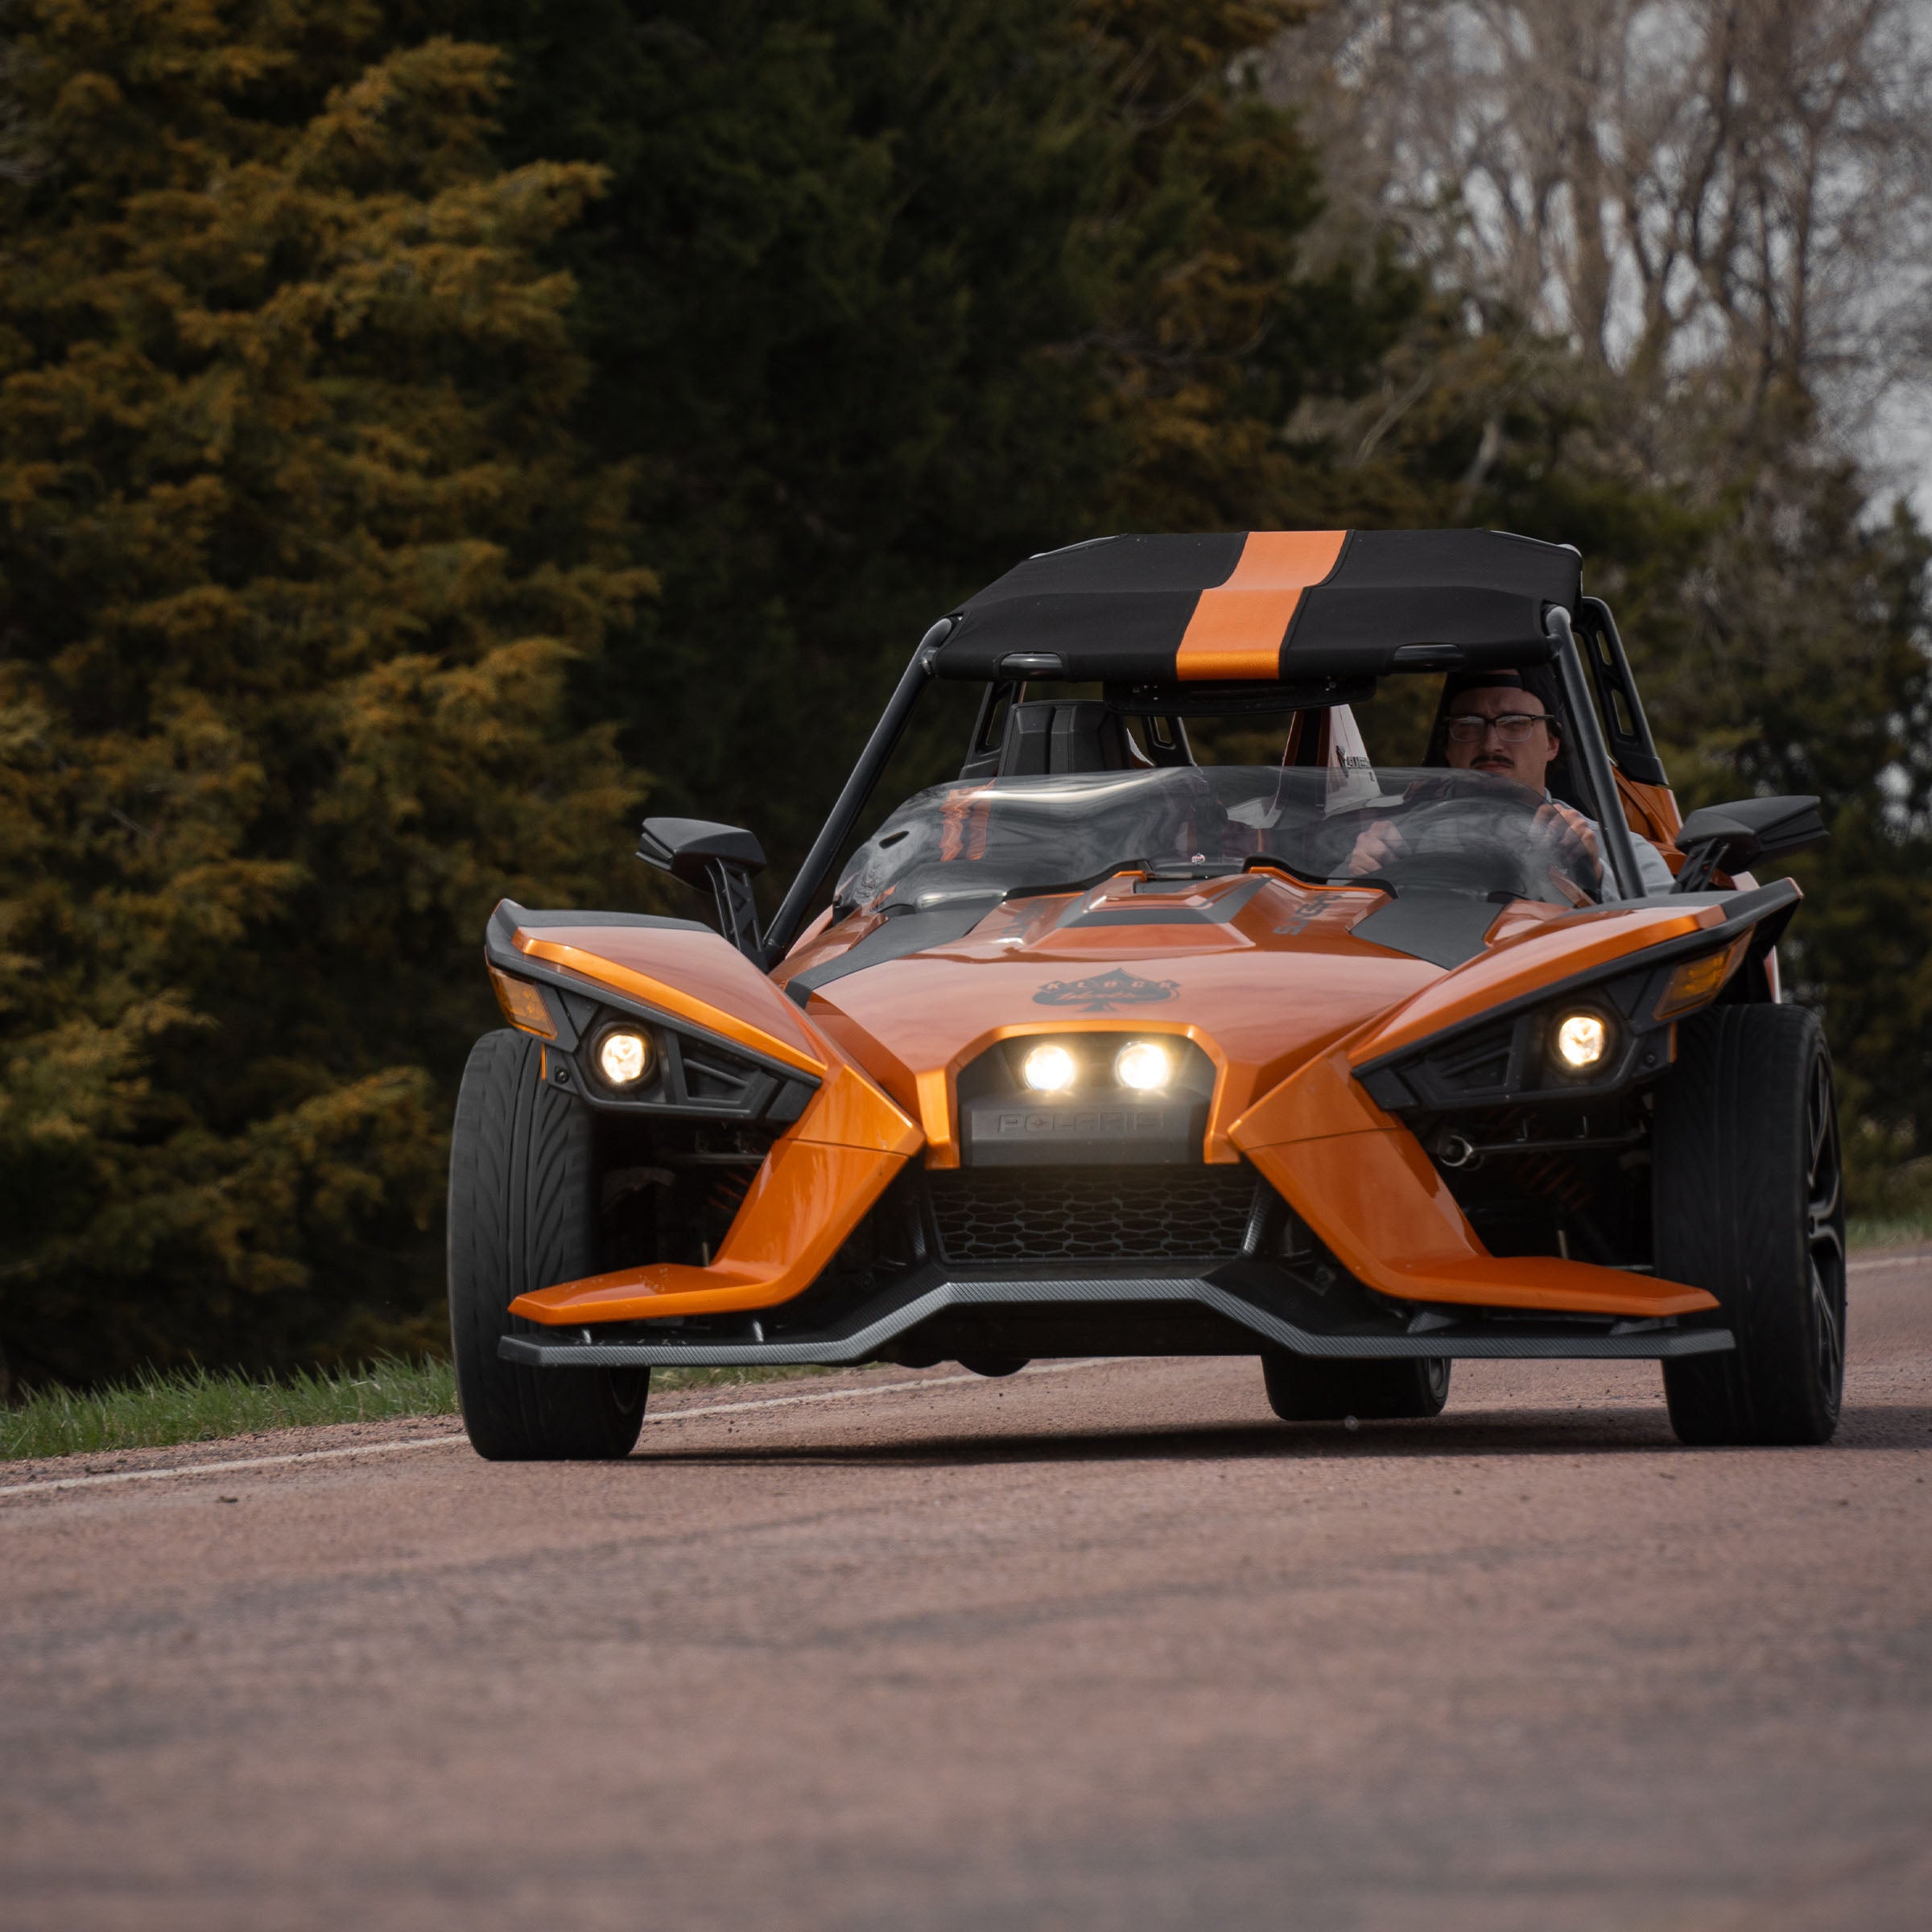 Tint Flare™ Windshield for Polaris® Slingshot shown in action(Tint)